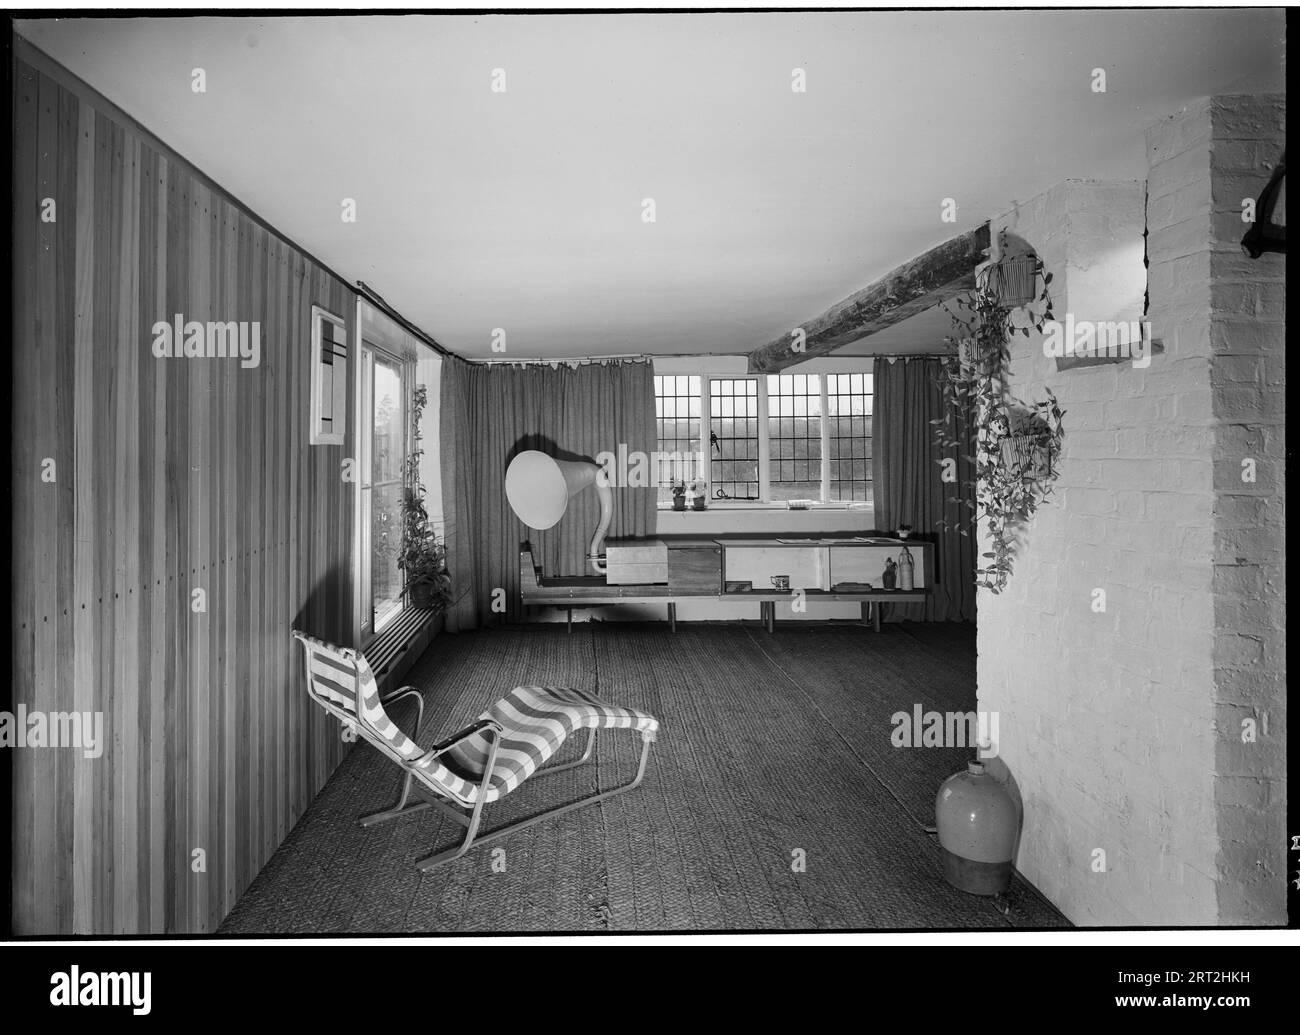 King's Mill, King's Mill Lane, Great Shelford, South Cambridgeshire, Cambridgeshire, 1957-1960. Interior view of the music room in the converted mill, home to the architect Leslie Martin, looking towards a boxed gramophone with a large horn. Stock Photo